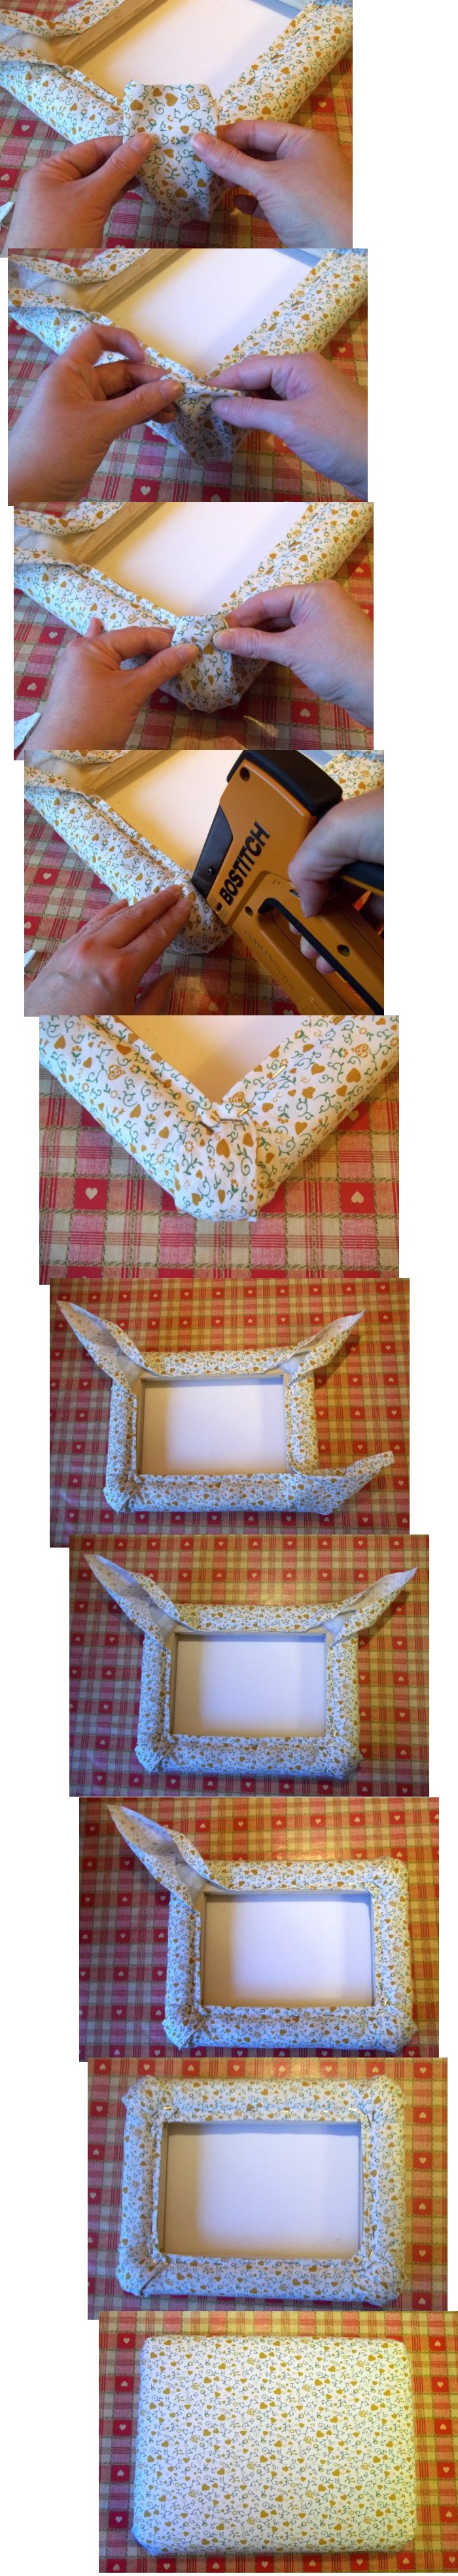 Things to make and do - Fabric Covered Notice Board